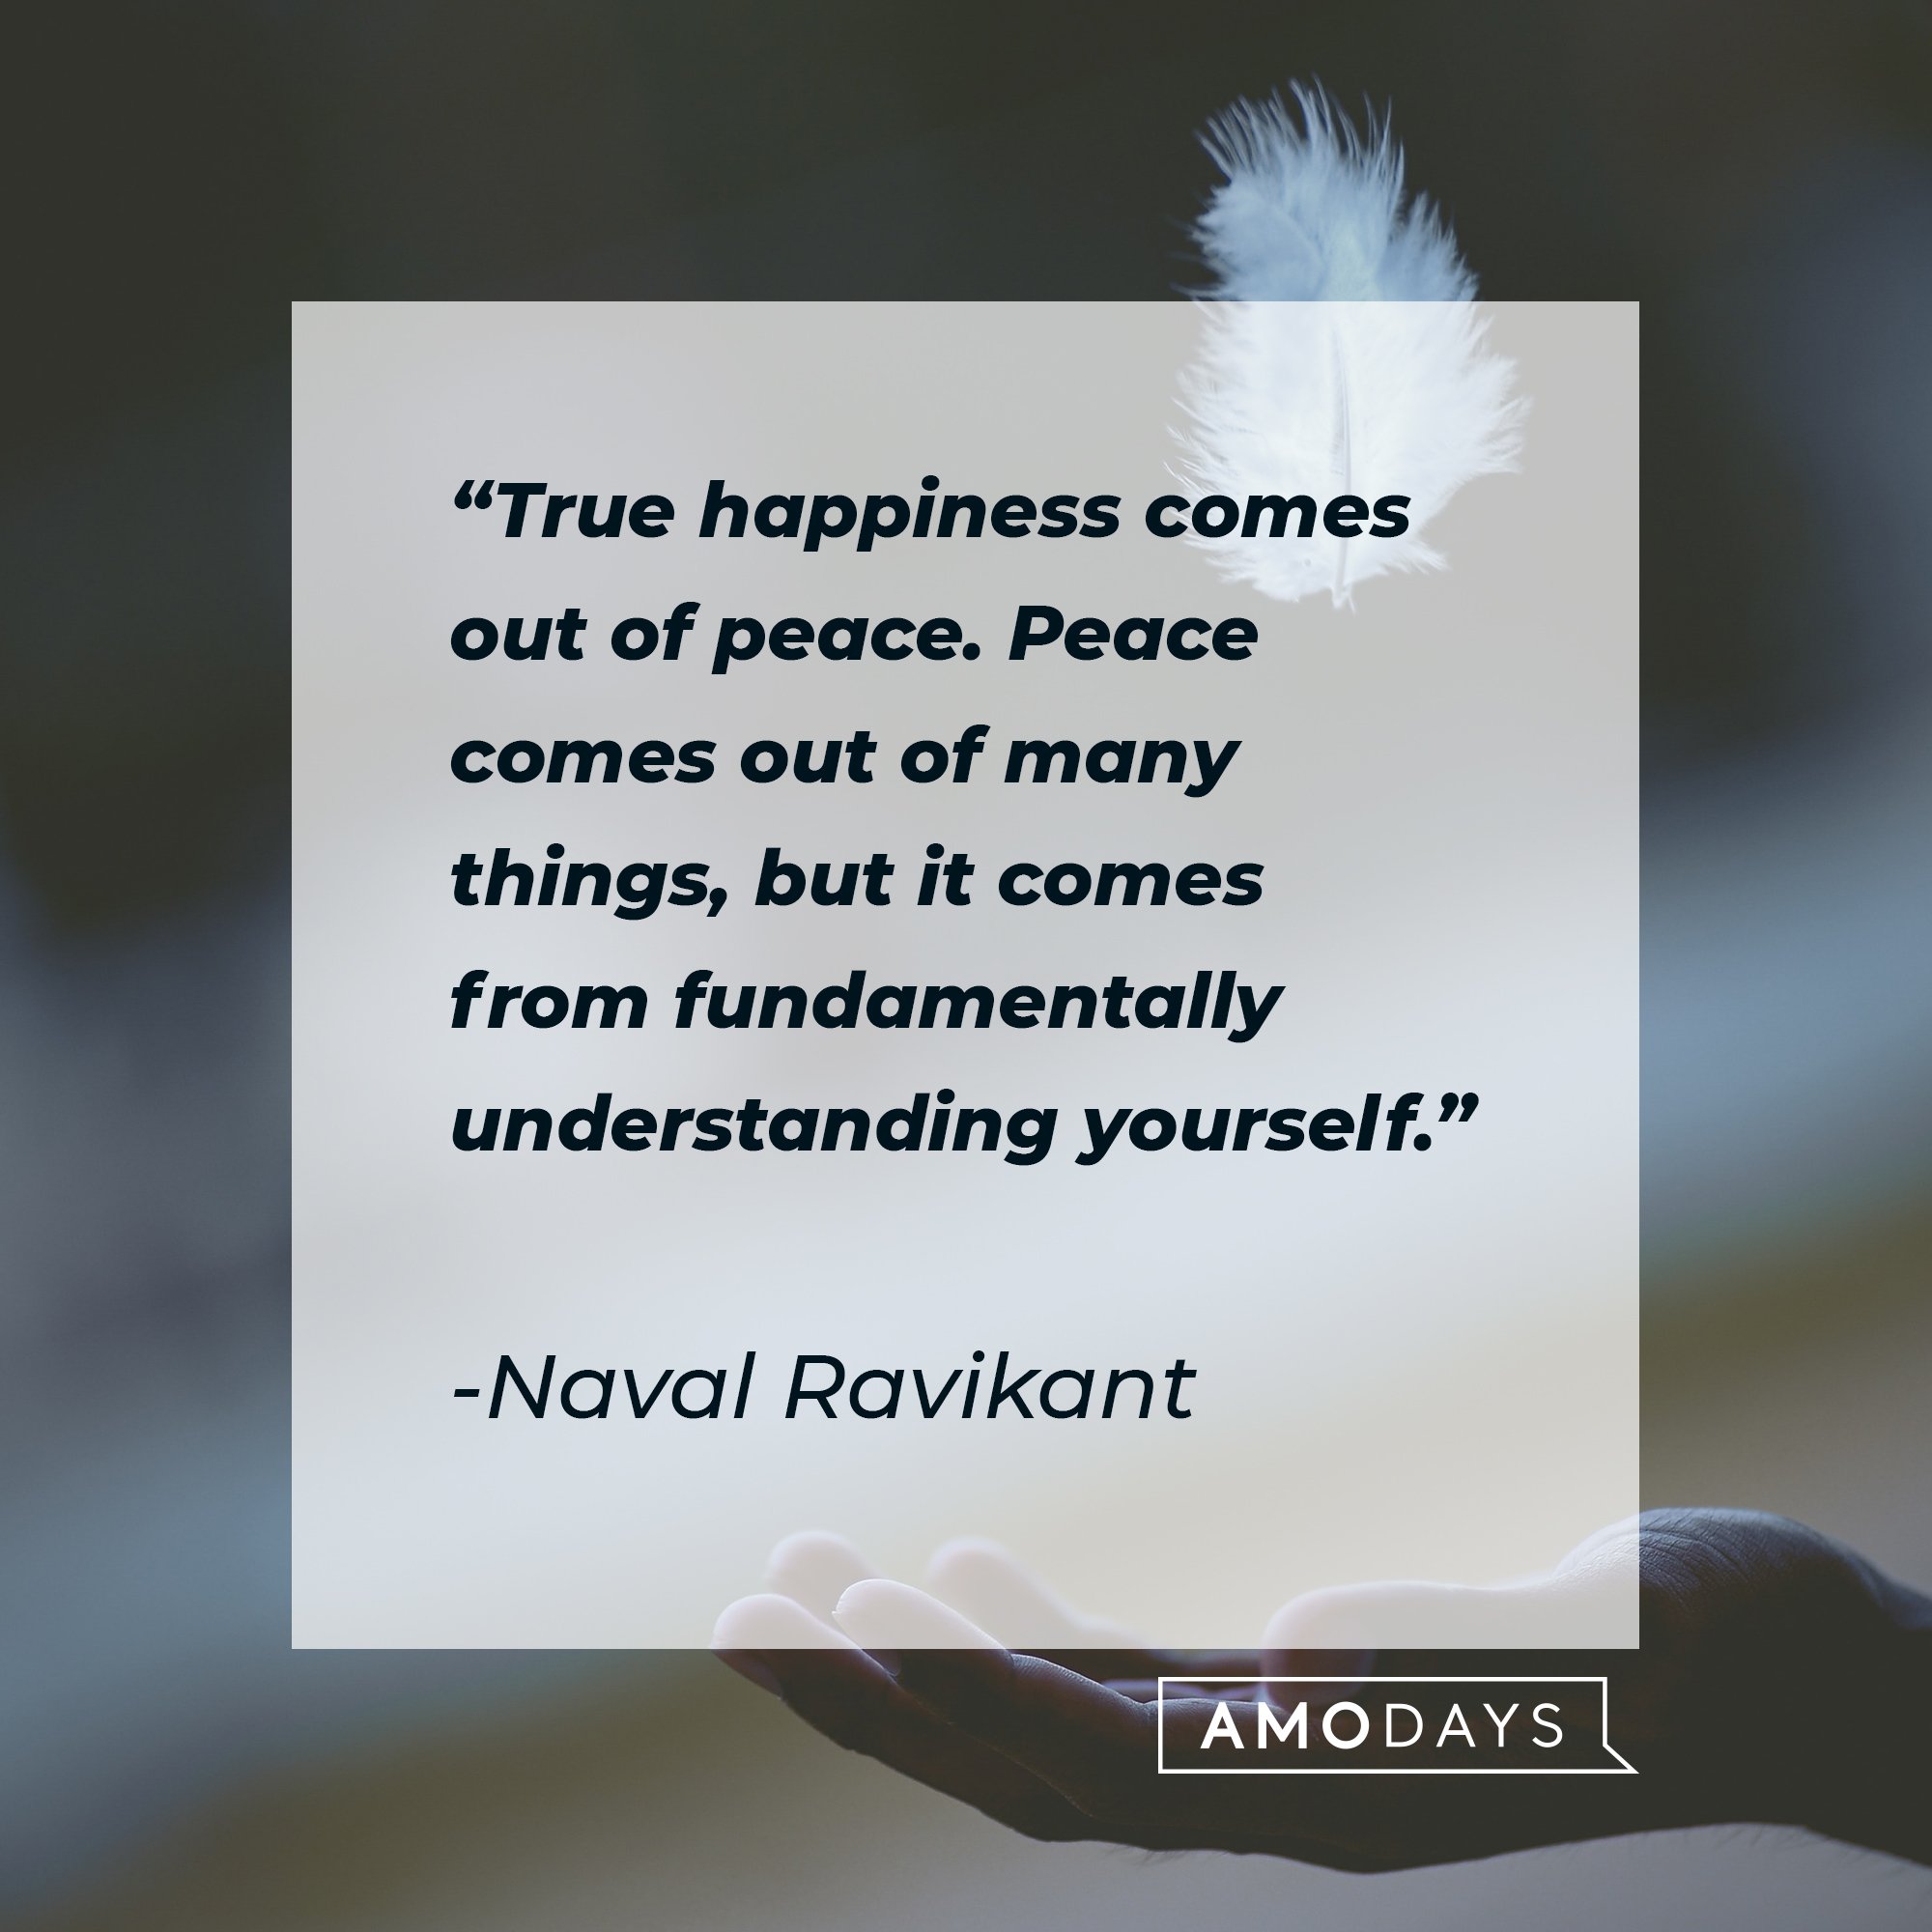 Naval Ravikant's quote: "True happiness comes out of peace. Peace comes out of many things, but it comes from fundamentally understanding yourself." | Image: AmoDays